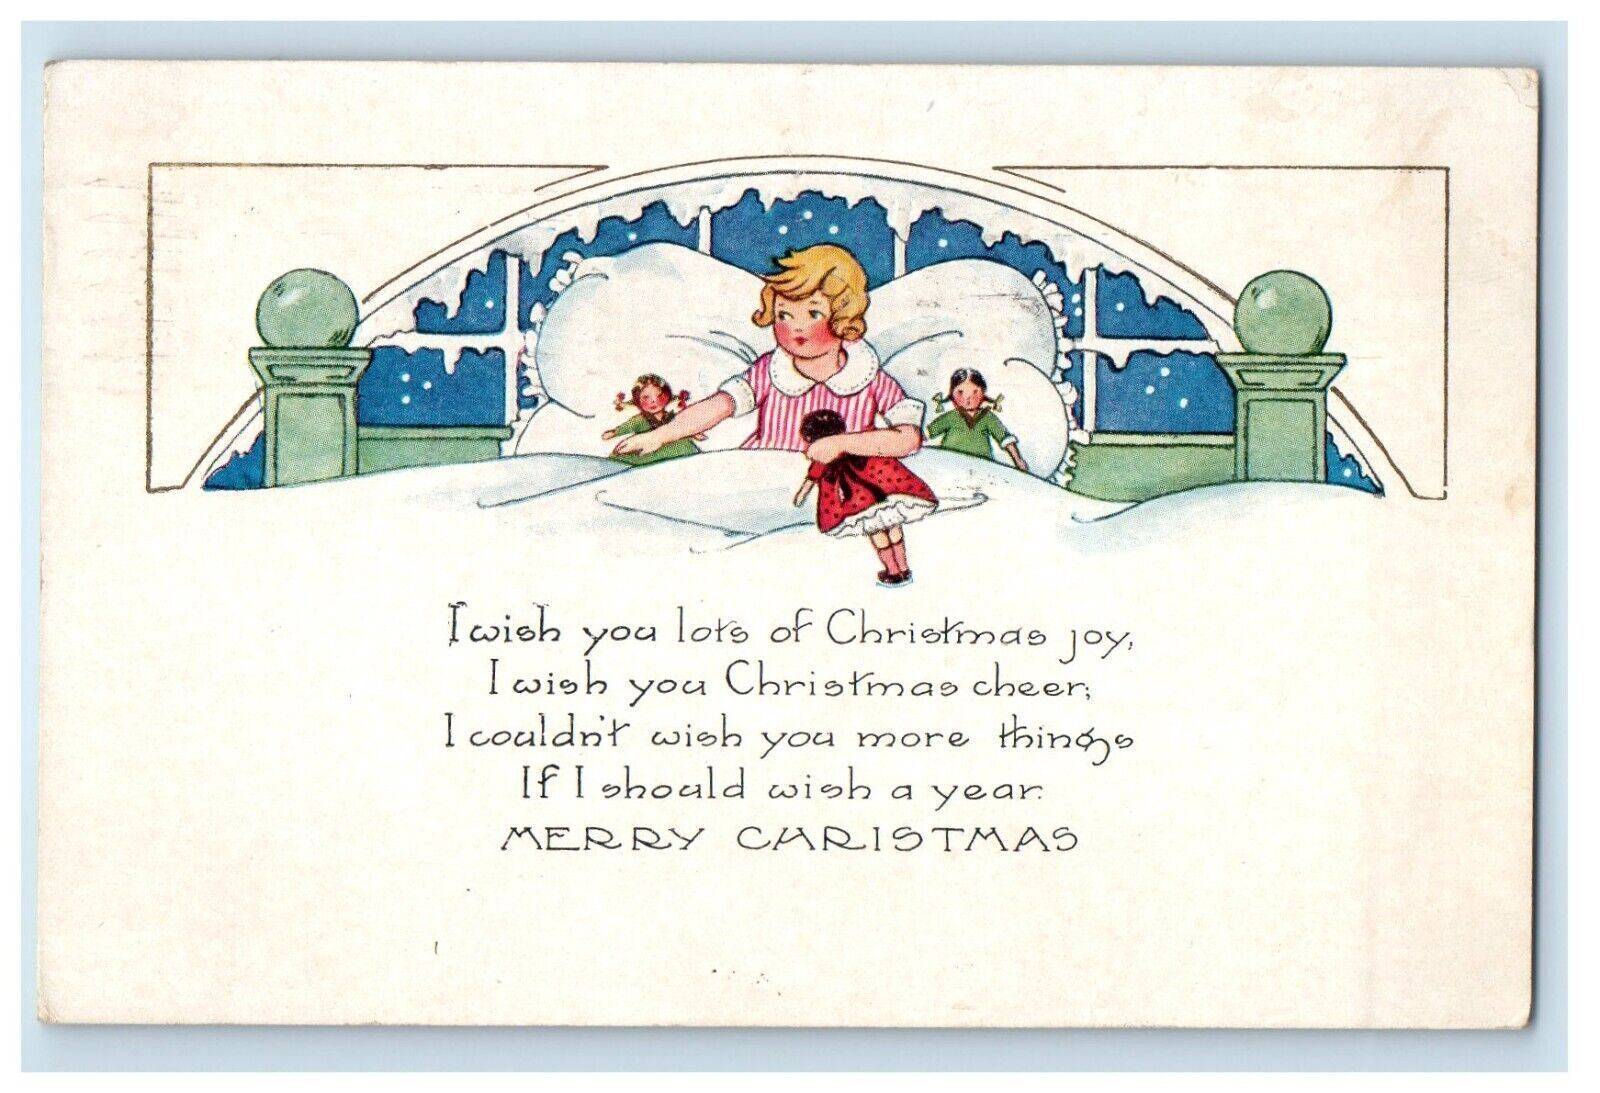 1922 Merry Christmas Seal Girl Bed With Dolls Winter Snowfall Vintage Postcard